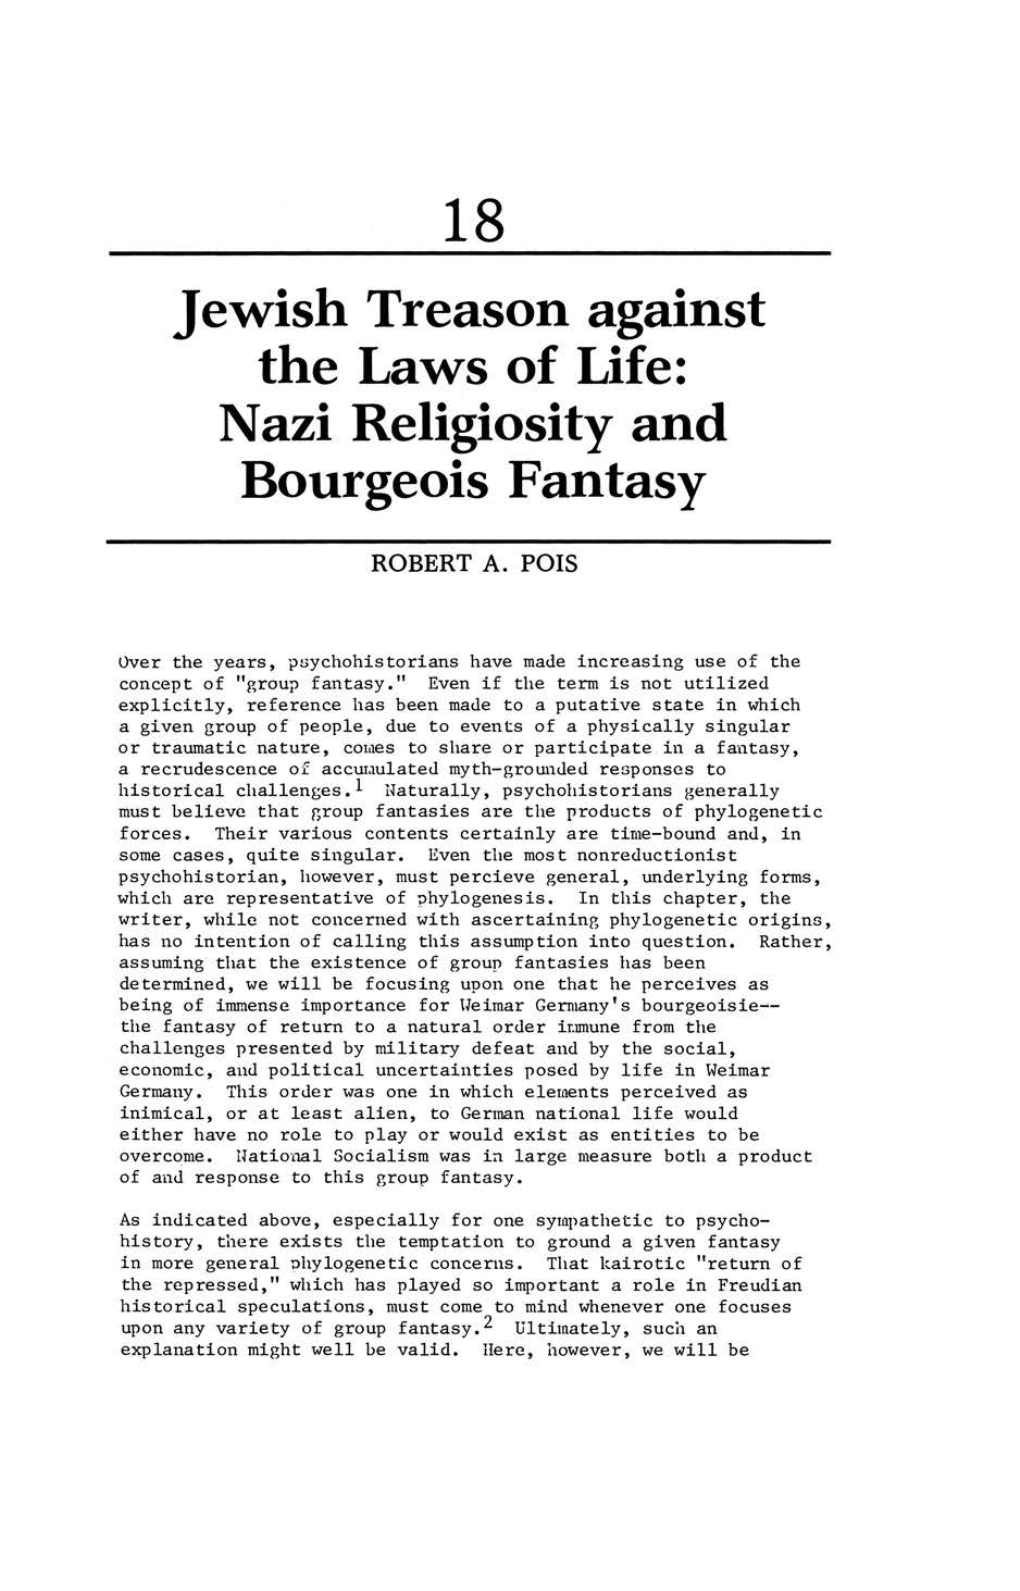 J Ewish Treason Against the Laws of Life: Nazi Religiosity and Bourgeois